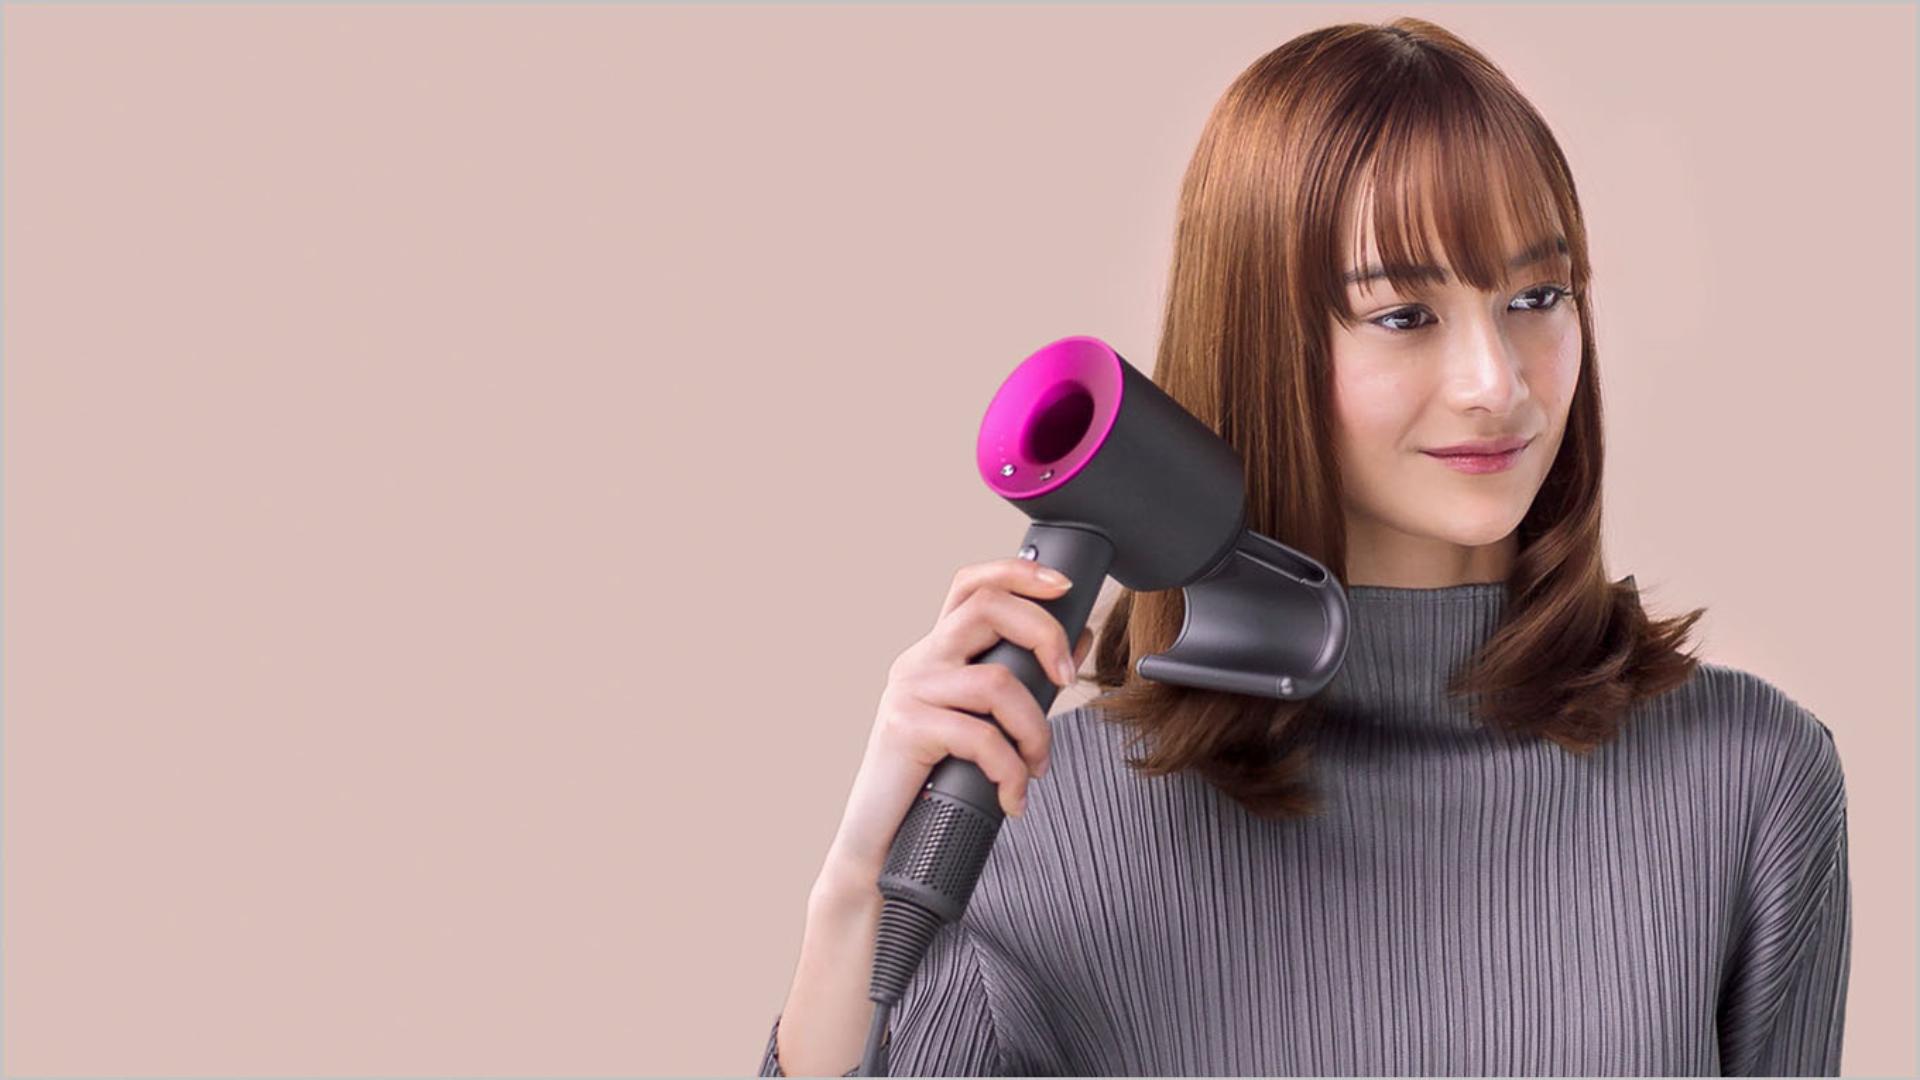 How To Turn On A Dyson Hair Dryer